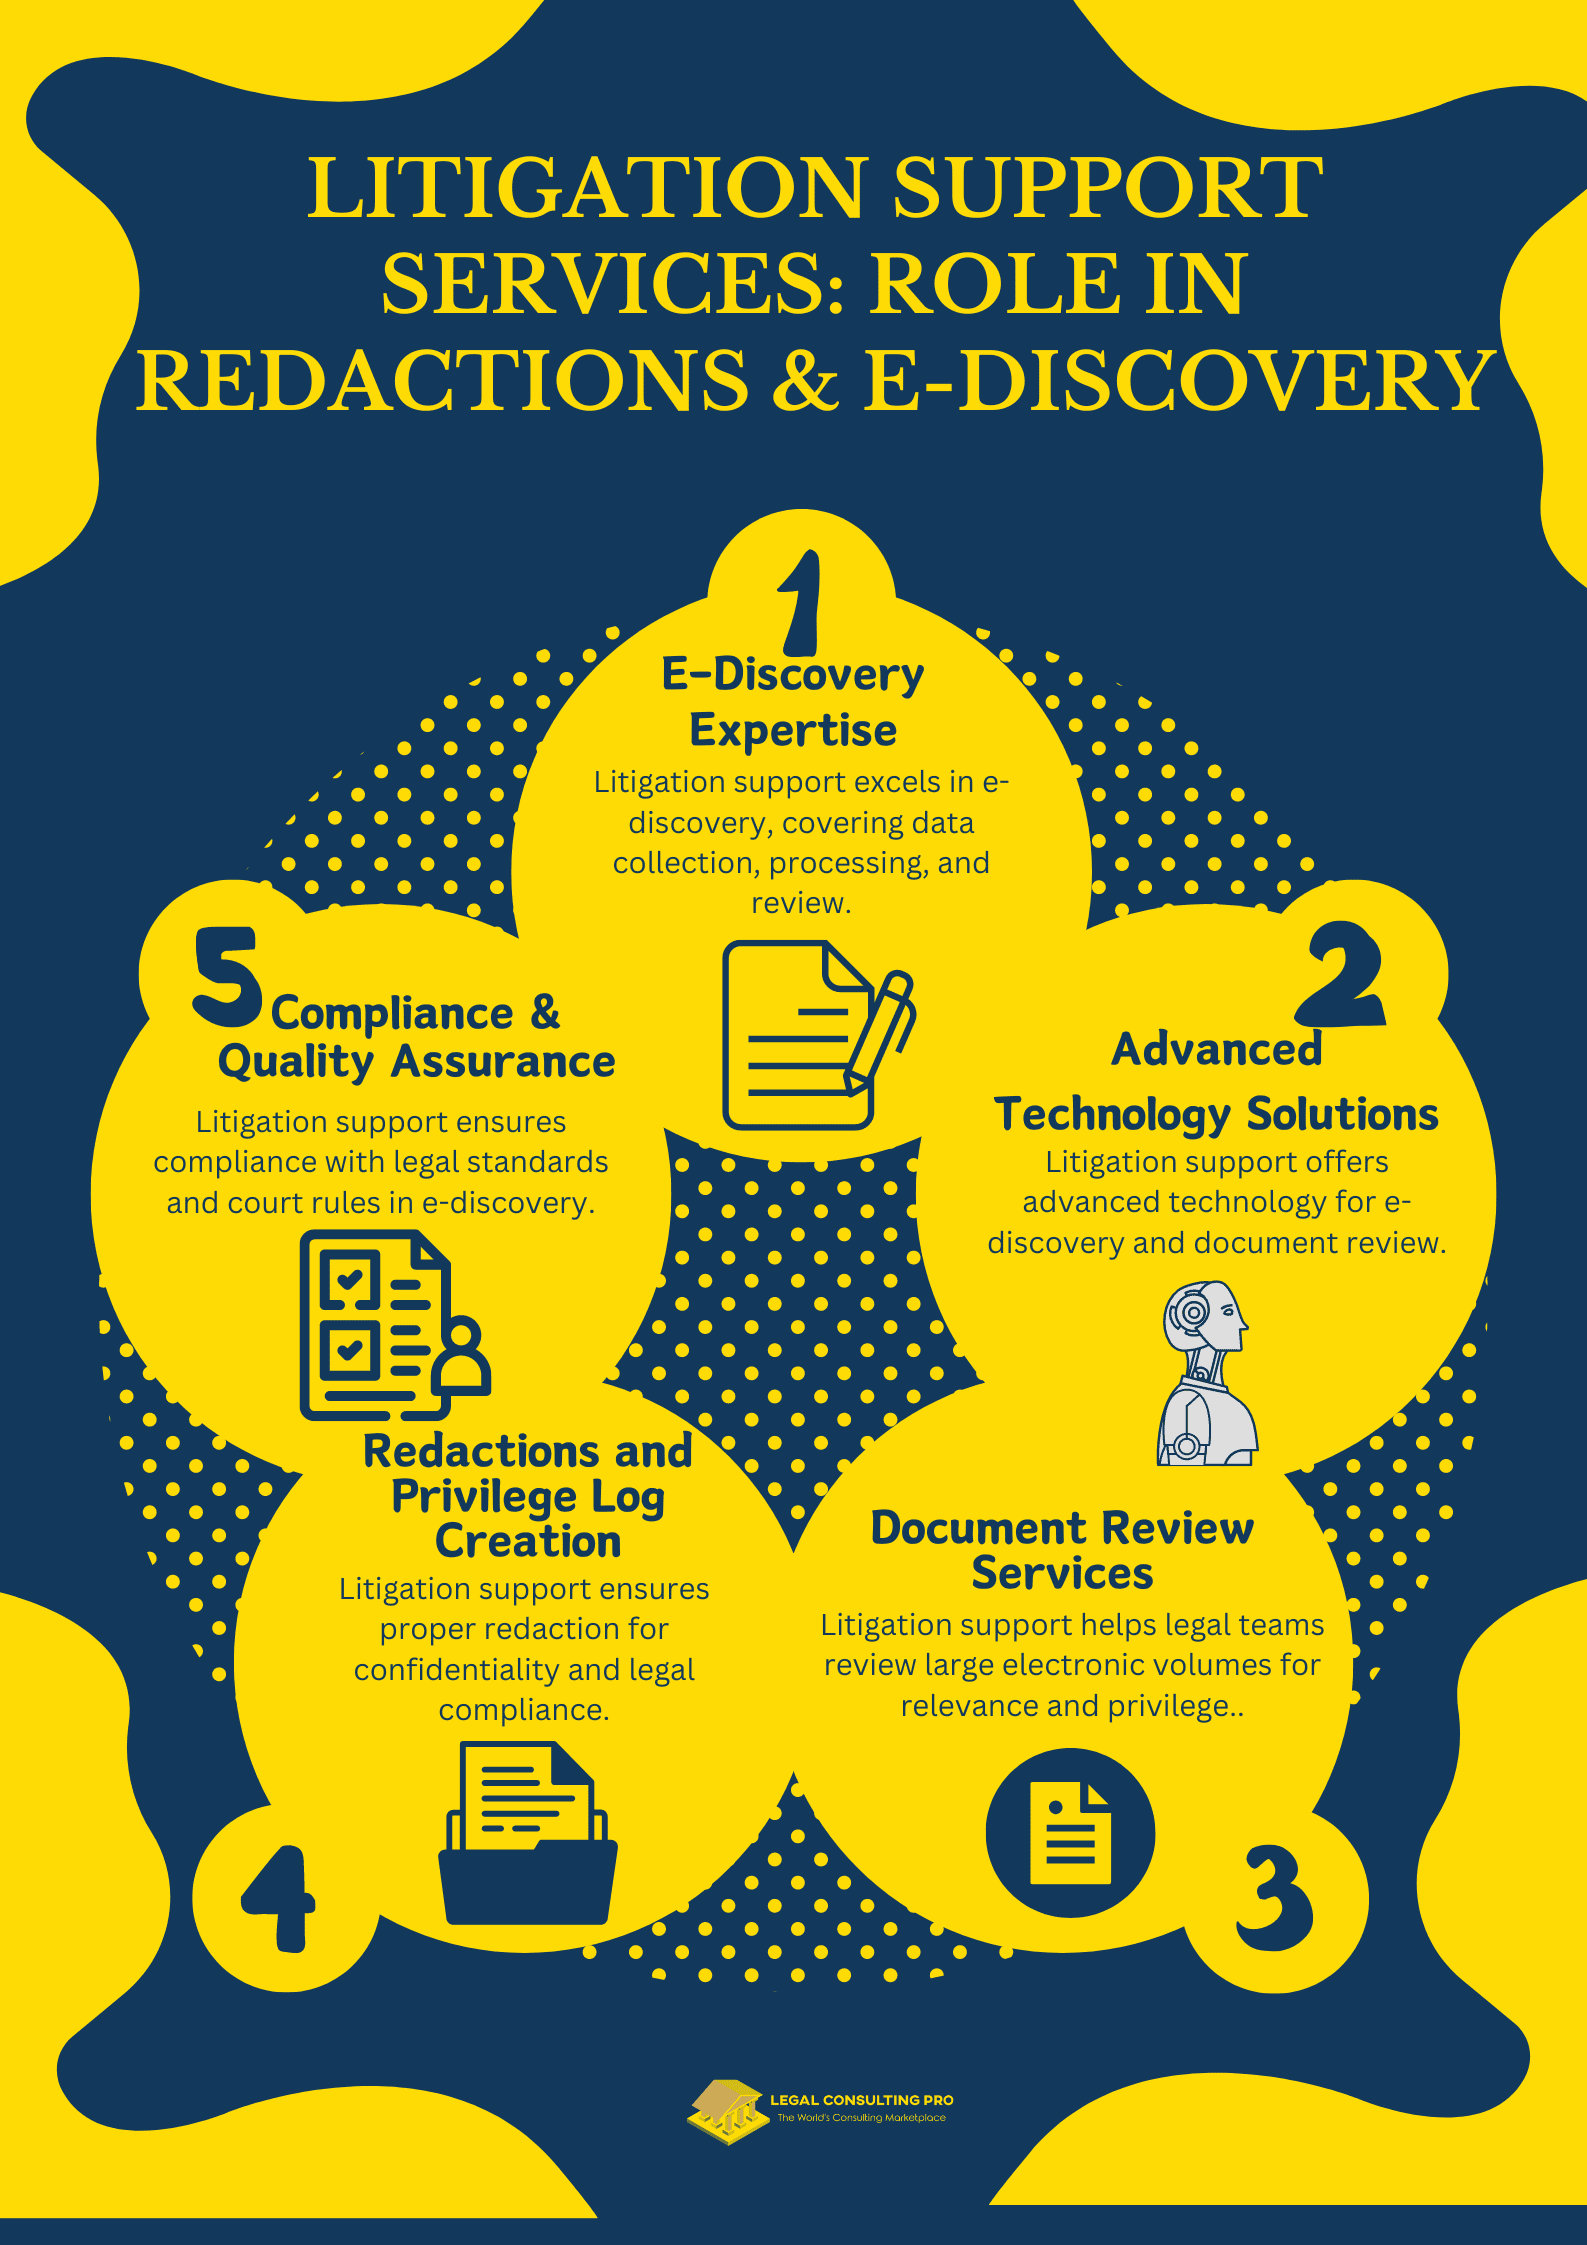 Litigation Support Services Role in Redactions & E-Discovery Infographic